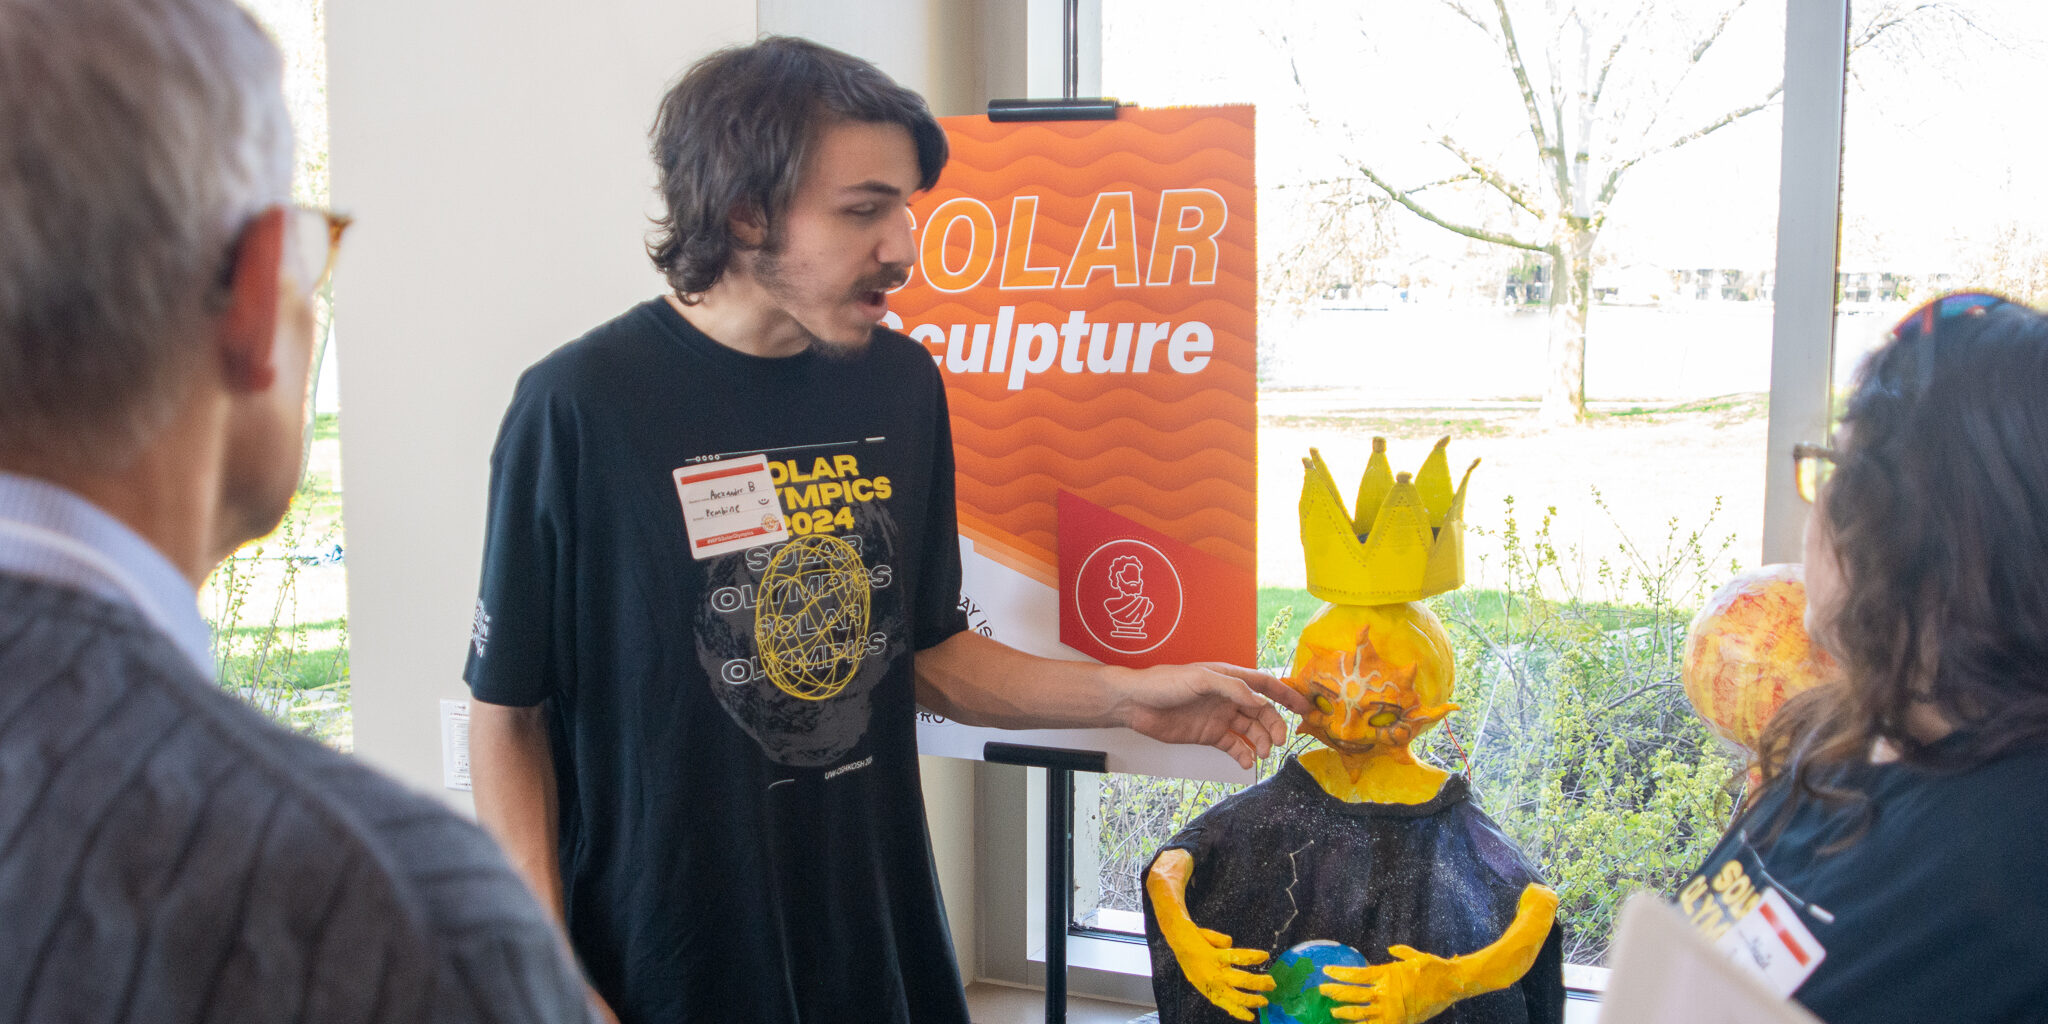 A high school boy speaks about a solar-inspired sculpture at Solar Olympics.